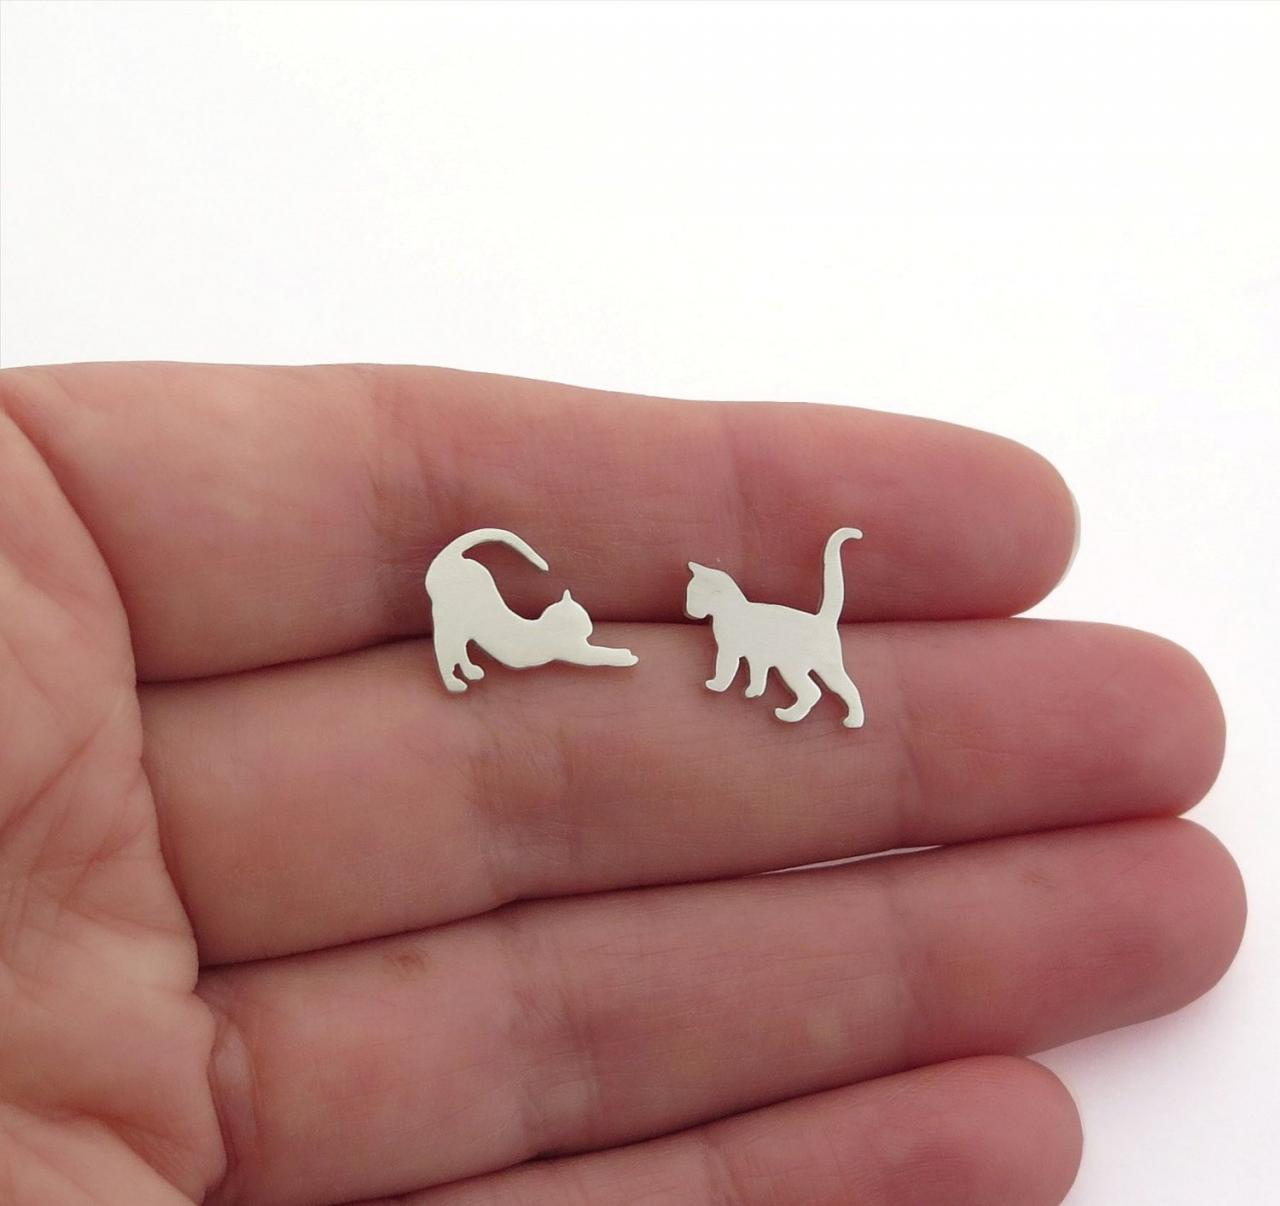 Cats Earrings - Sterling Silver Mismatched Cats Studs - Cat Lover Gift